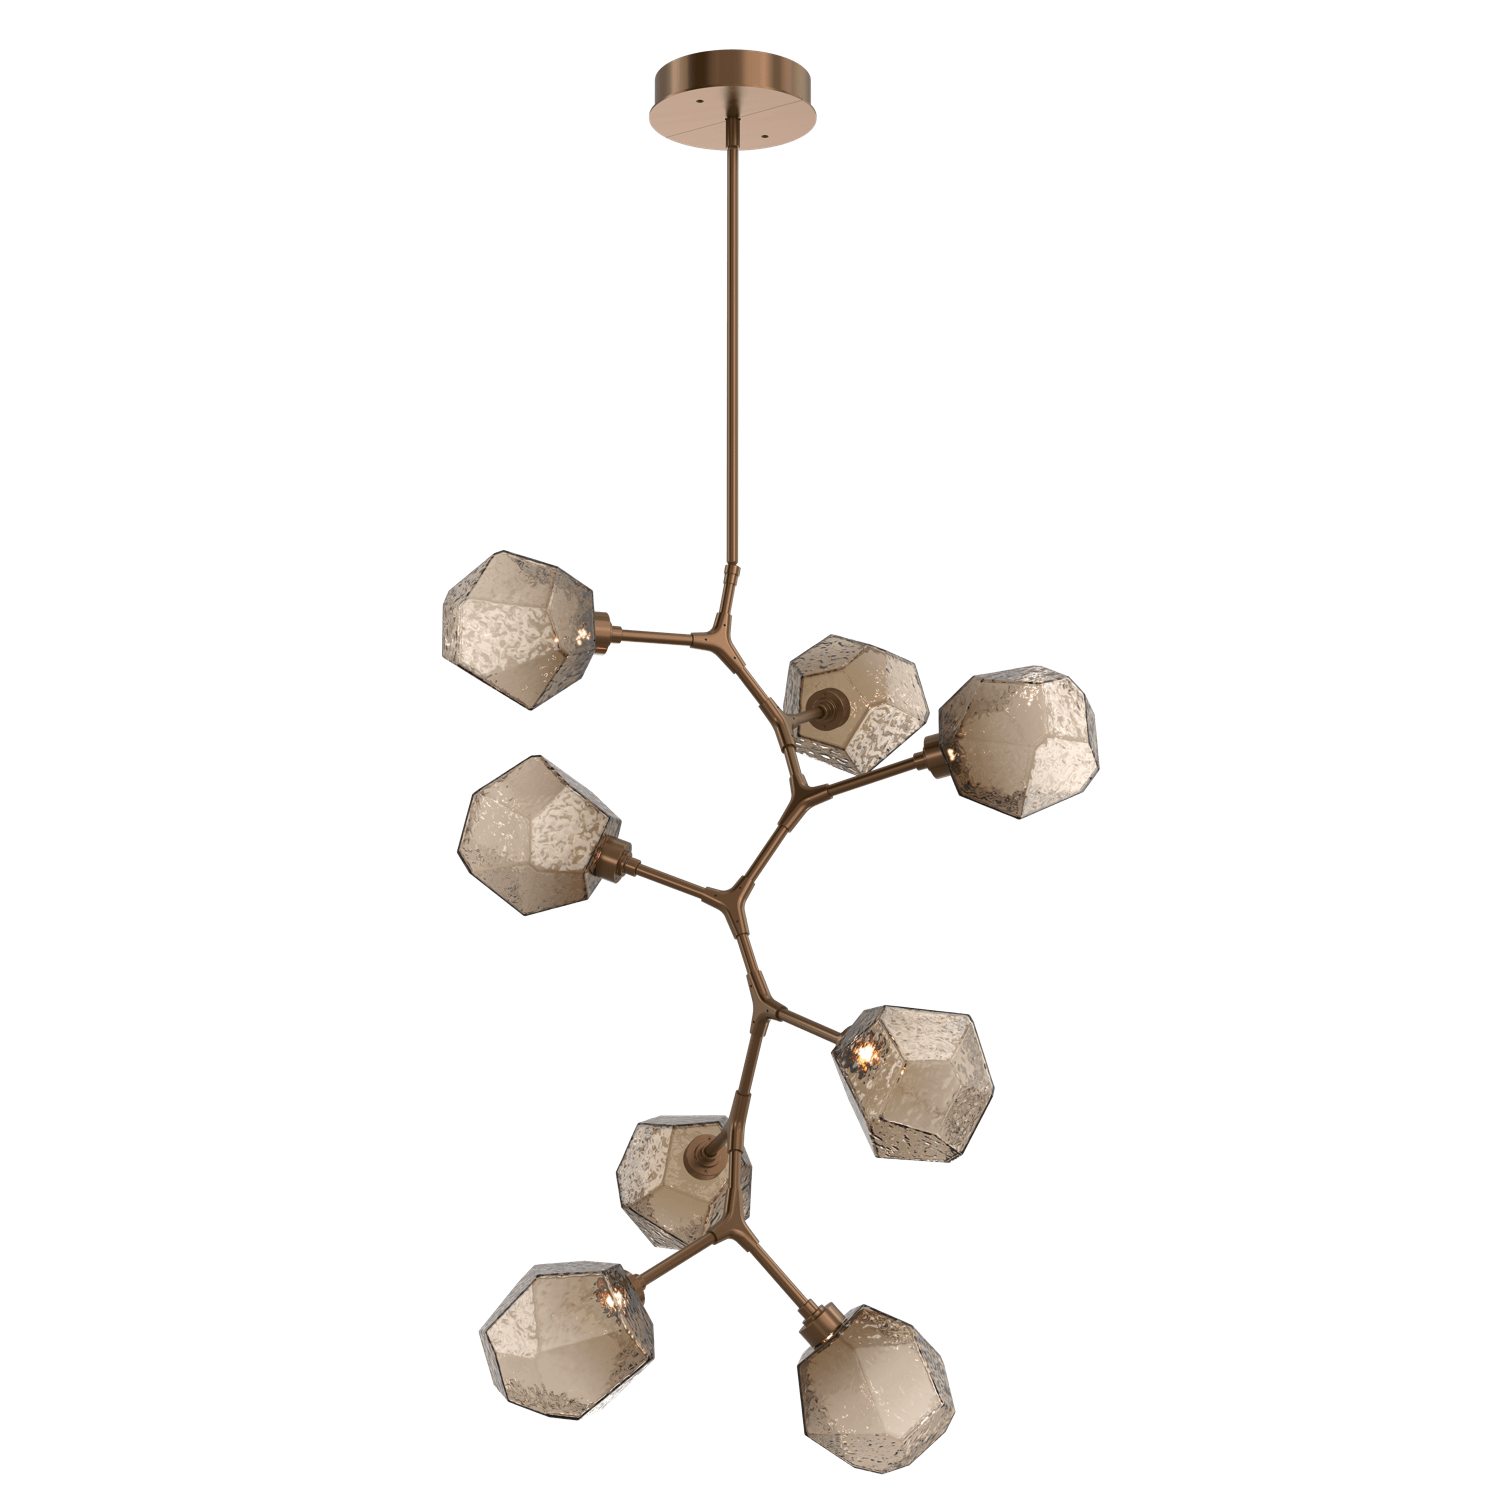 CHB0039-VB-RB-B-Hammerton-Studio-Gem-8-light-modern-vine-chandelier-with-oil-rubbed-bronze-finish-and-bronze-blown-glass-shades-and-LED-lamping